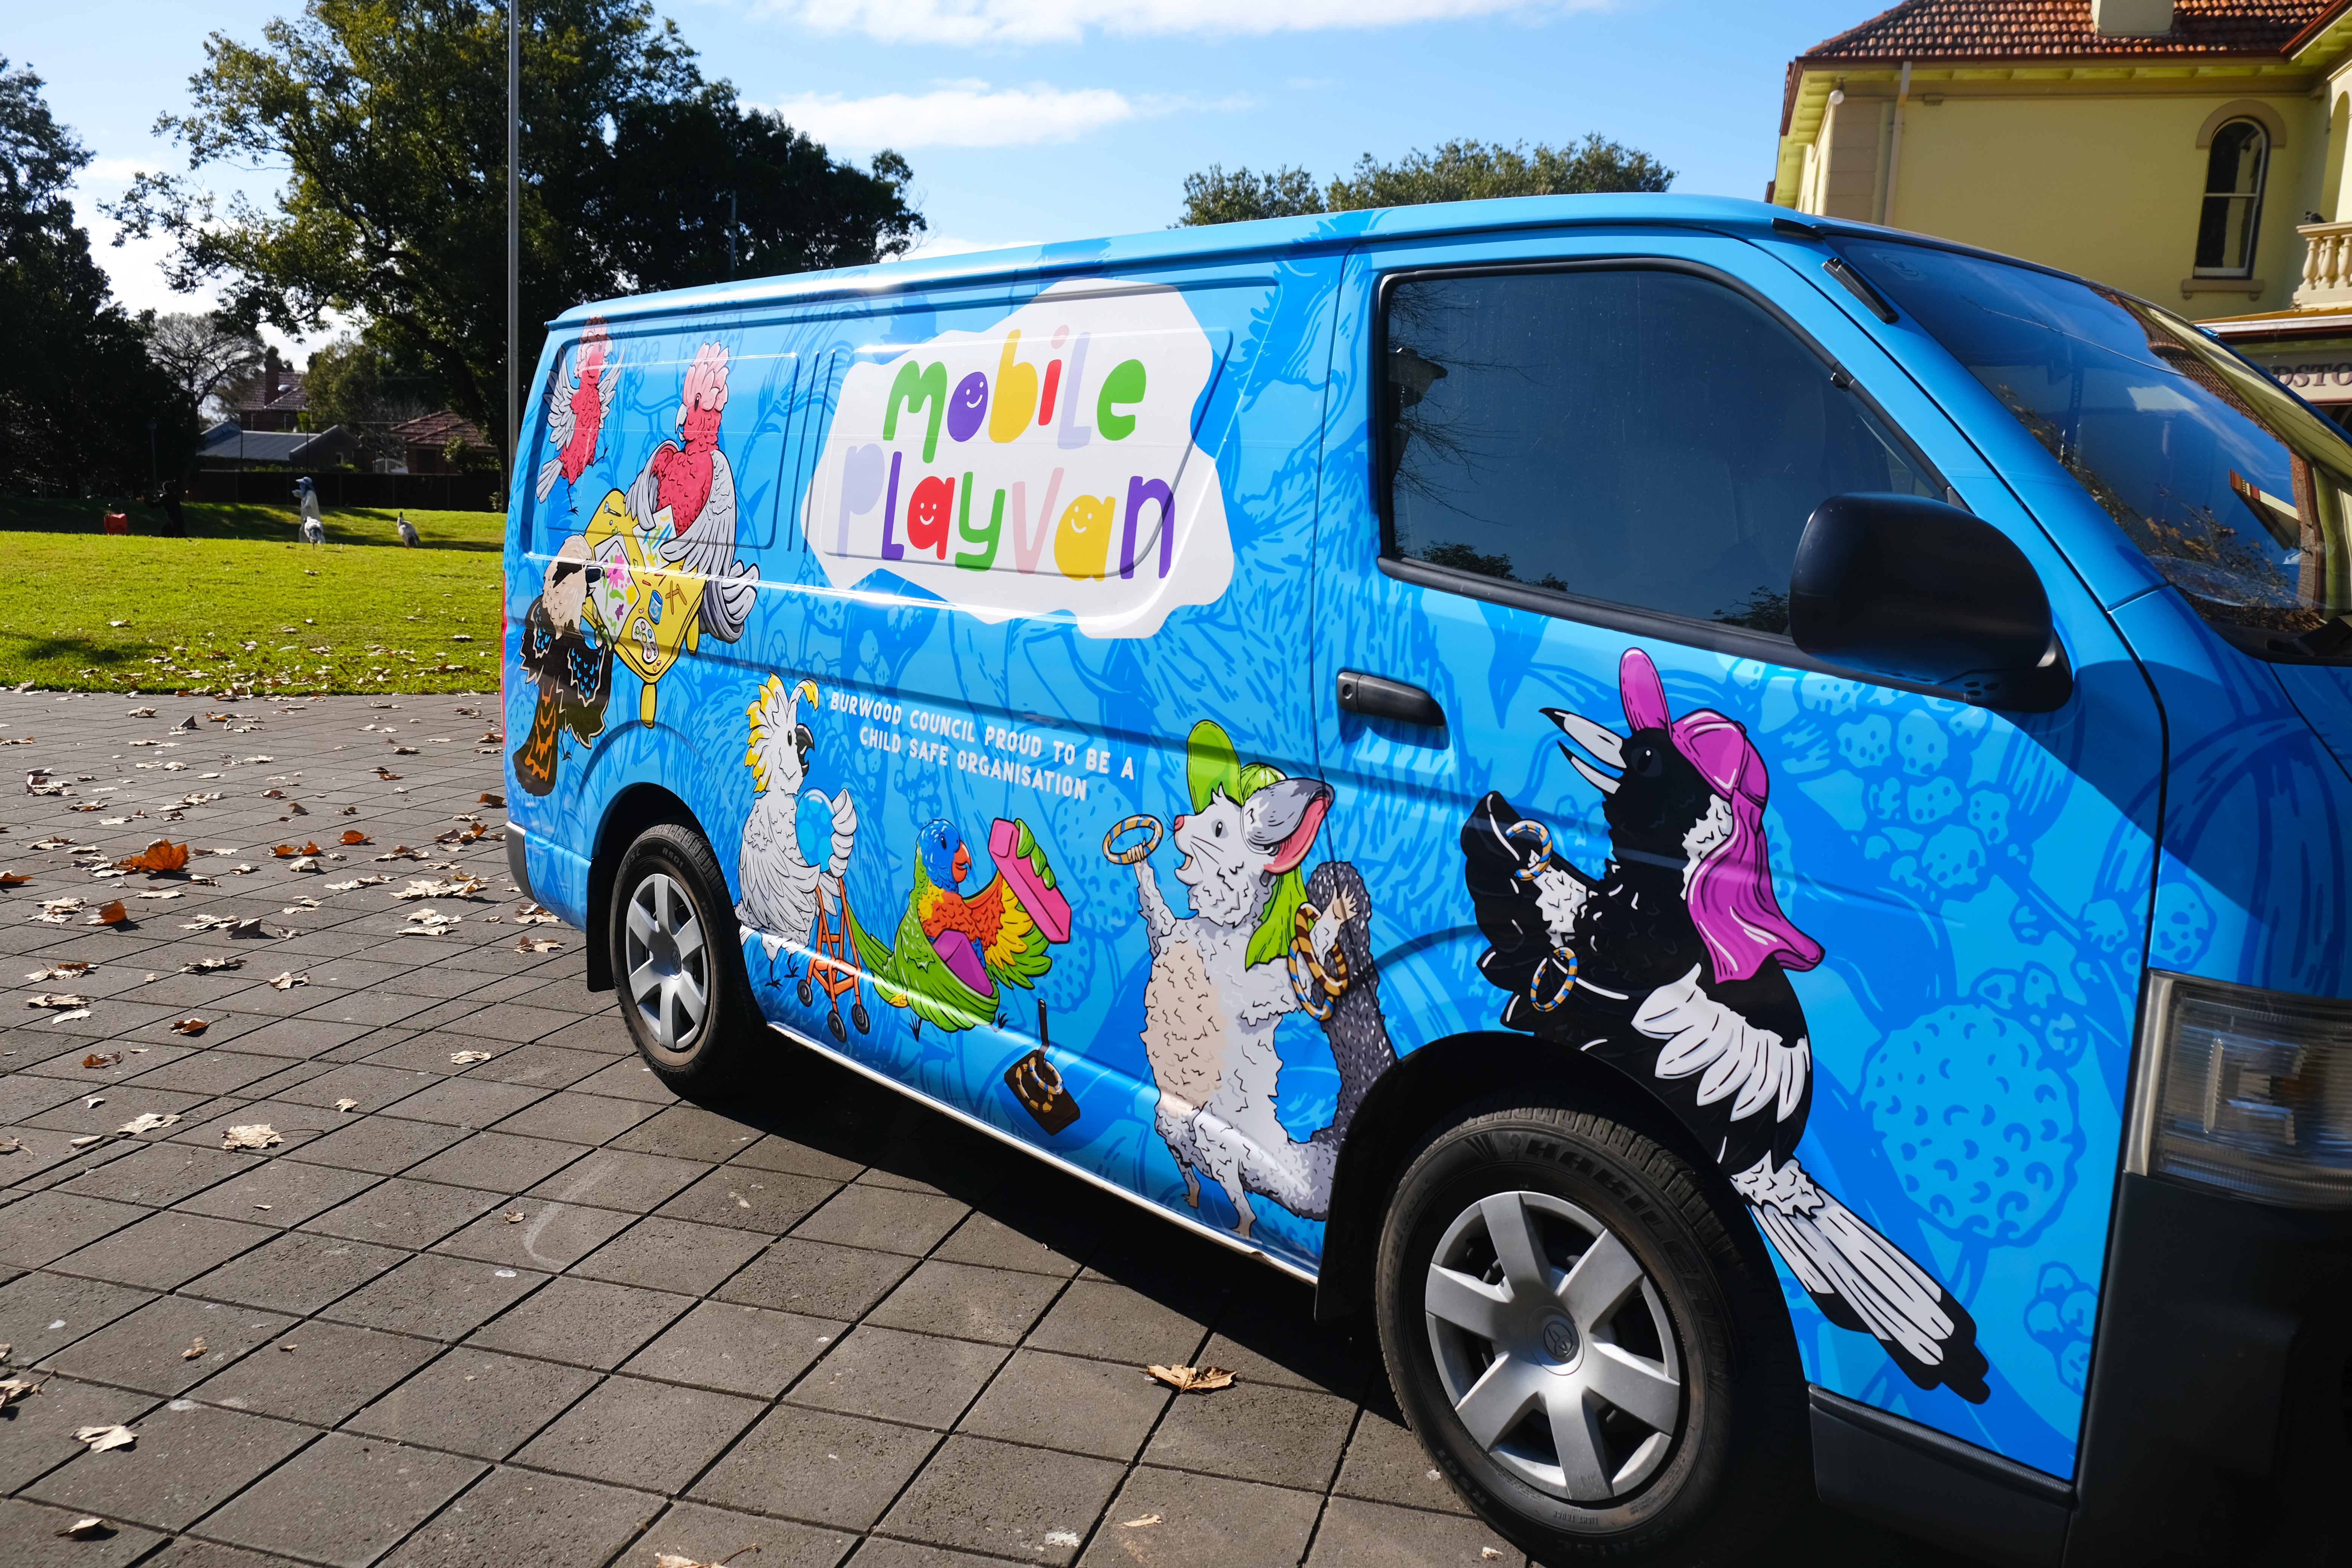 A van wrapped in colourful Australian animal themed artwork